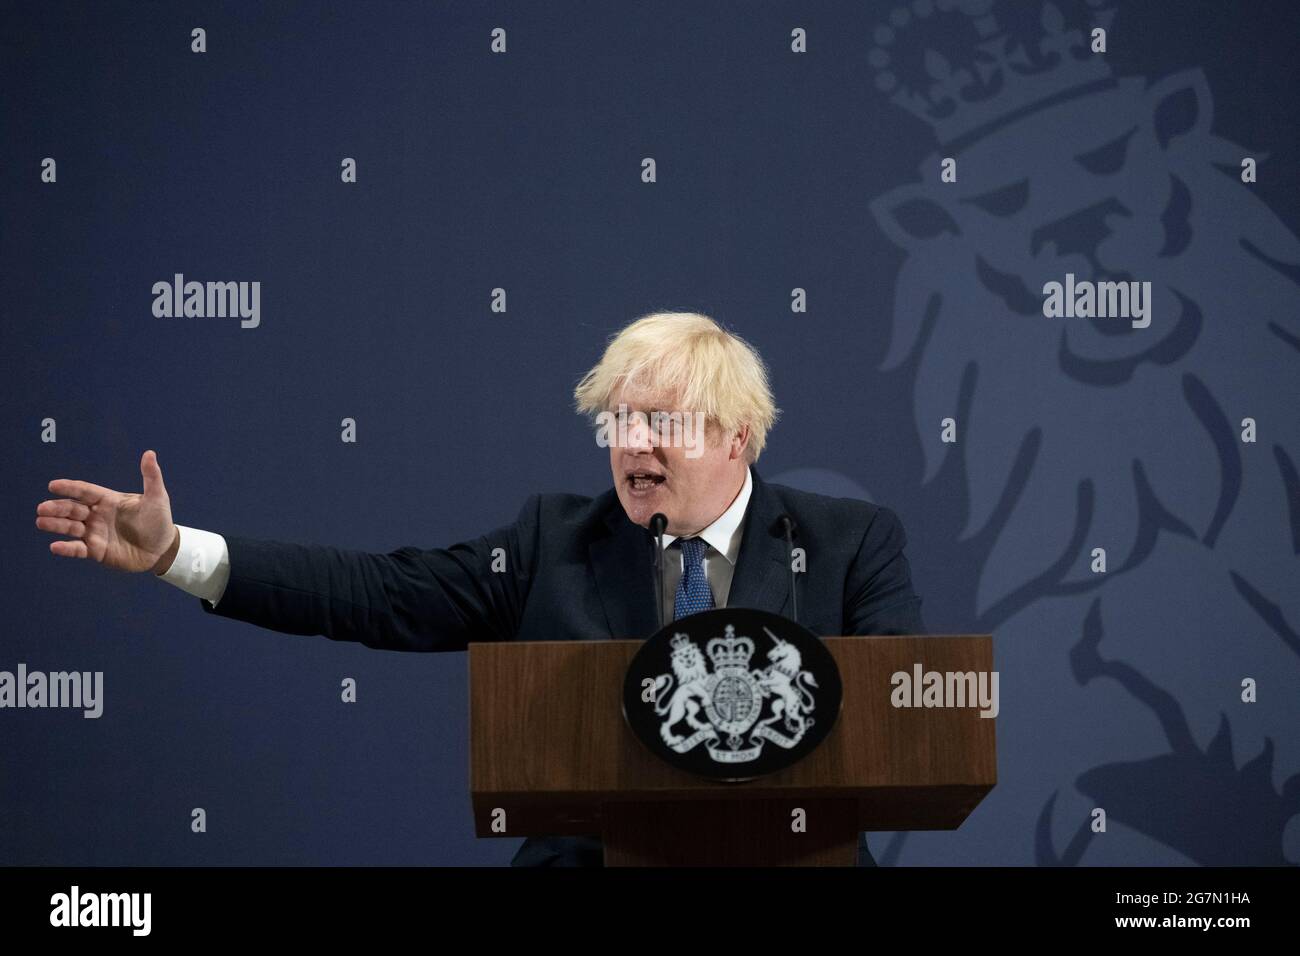 Prime Minister Boris Johnson speaking during a visit to the UK Battery Industrialisation Centre in Coventry where he insisted his levelling up agenda is "win win" and will not be a case of "robbing Peter to pay Paul" as tries to keep traditional Tories in the South on side. Picture date: Thursday July 15, 2021. Stock Photo